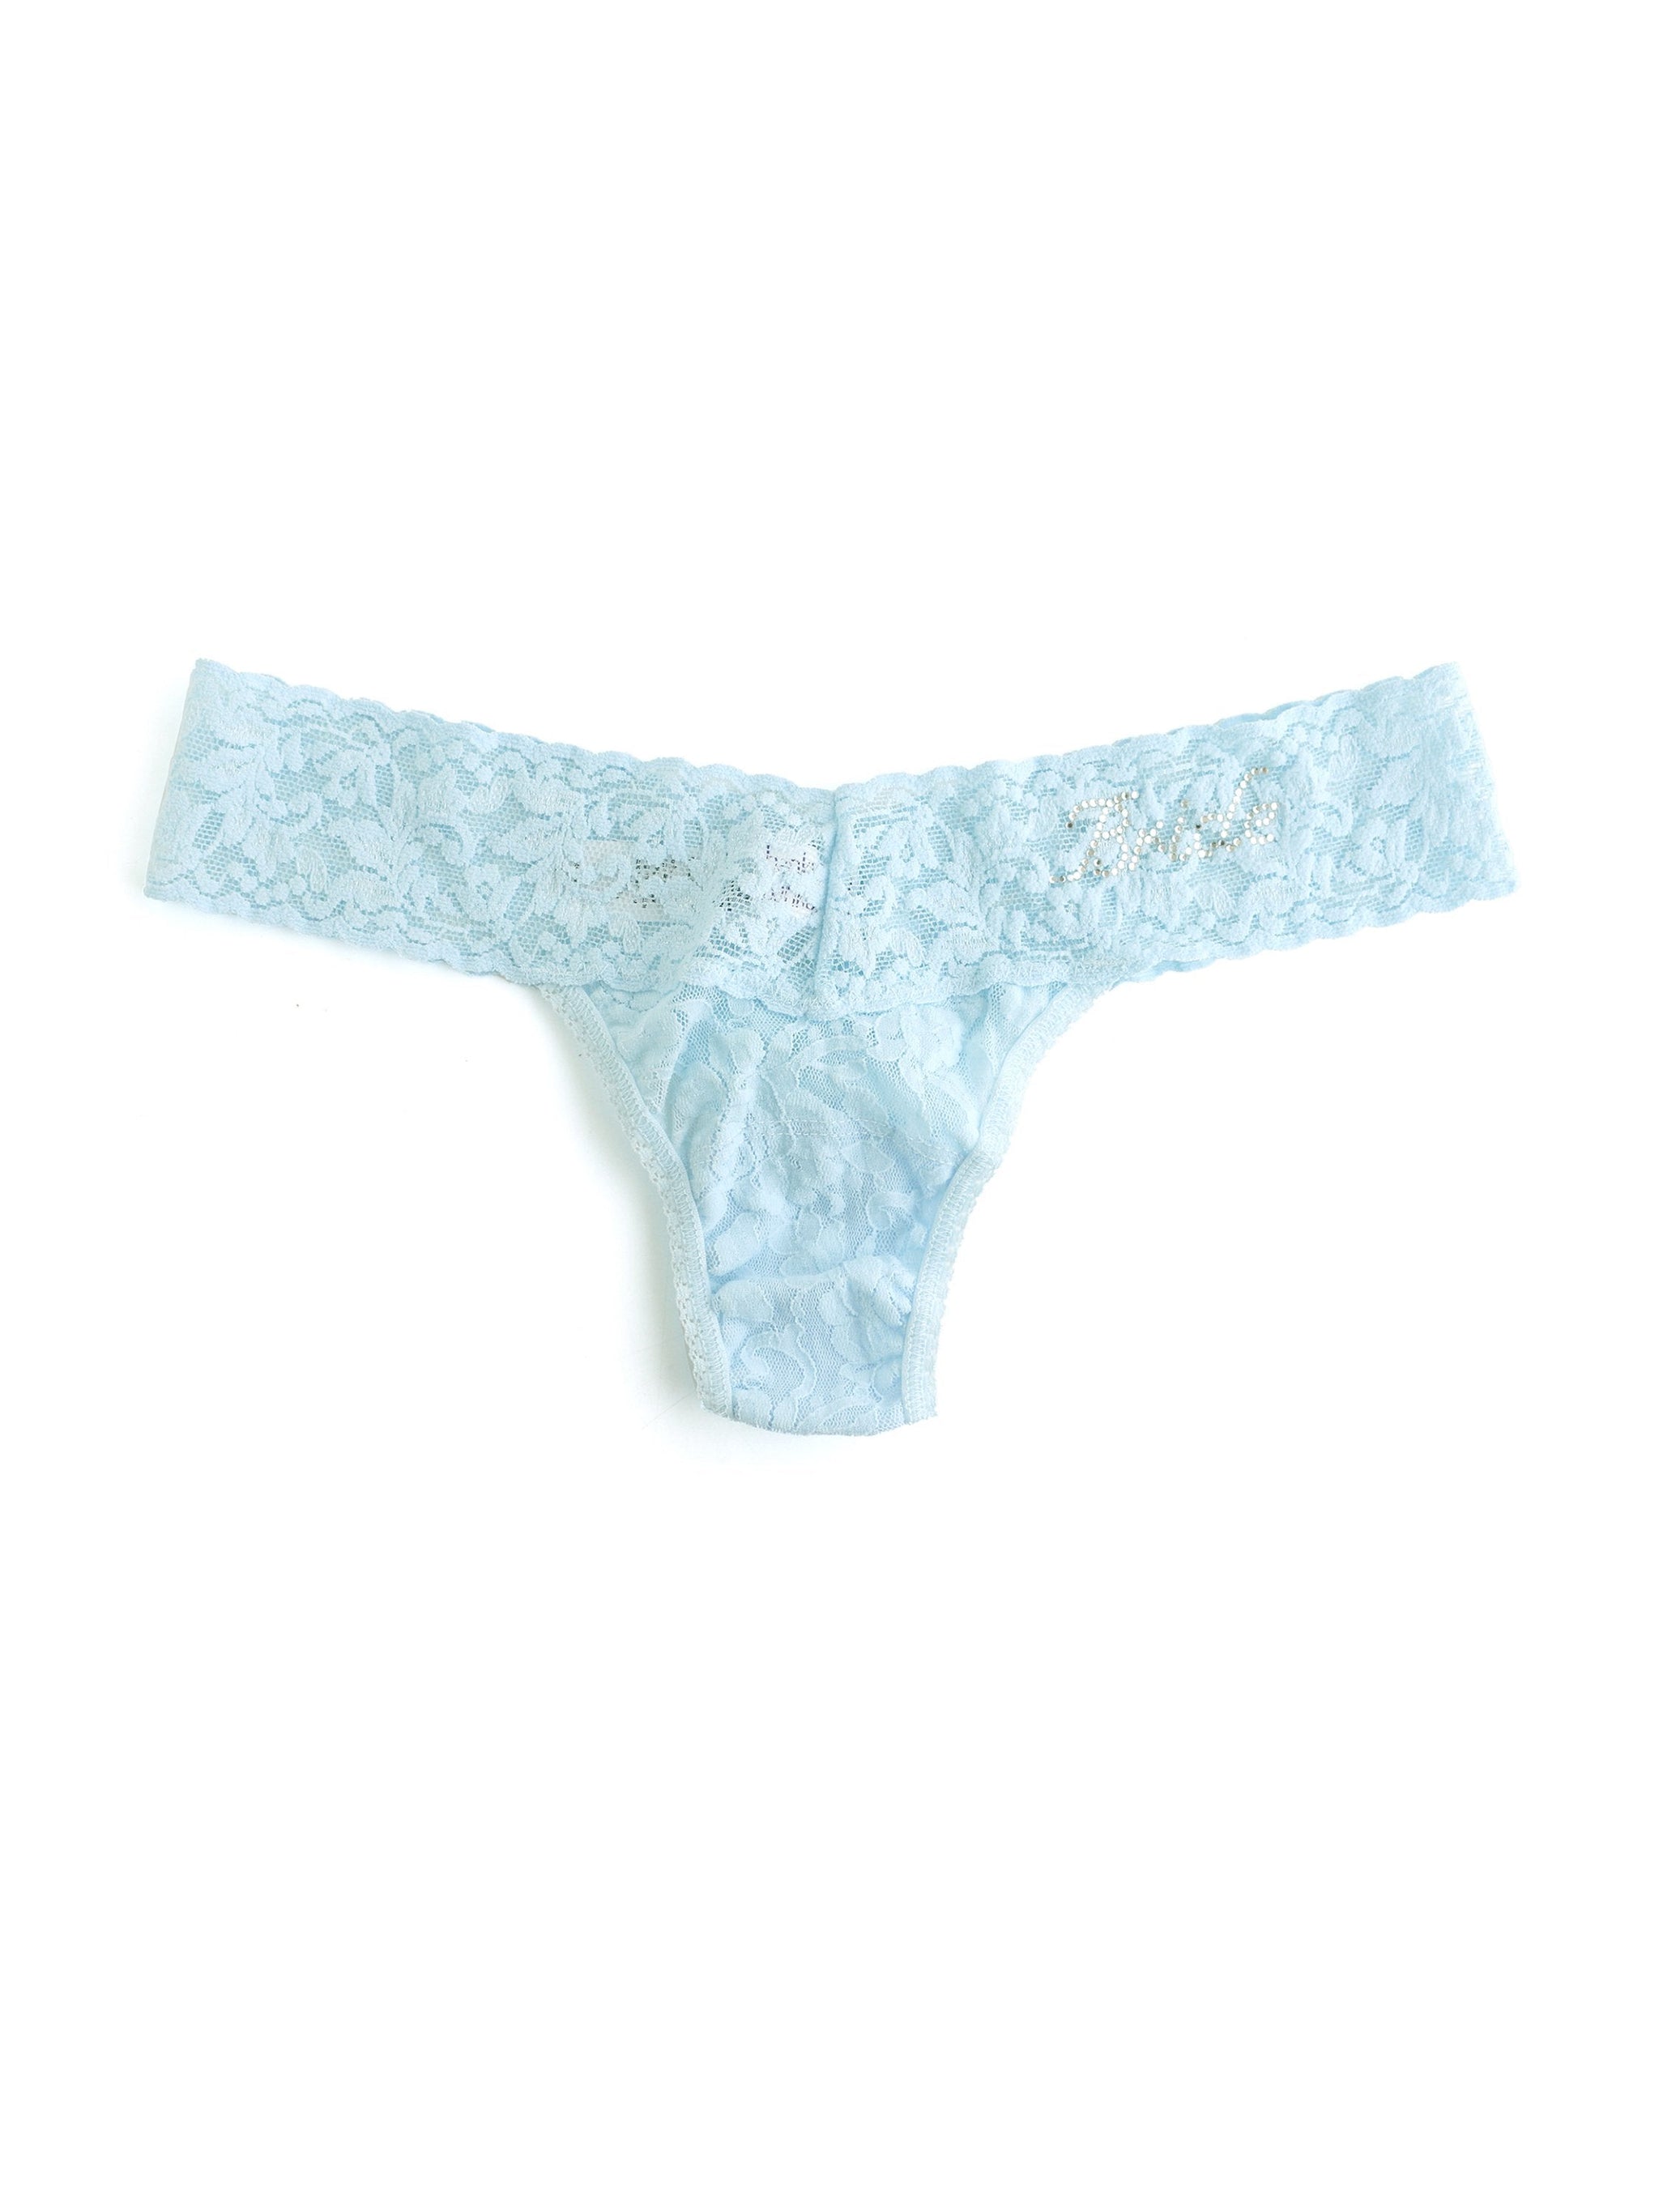 National Underwear Day: Best Underwear From Lululemon, Hanky Panky and More